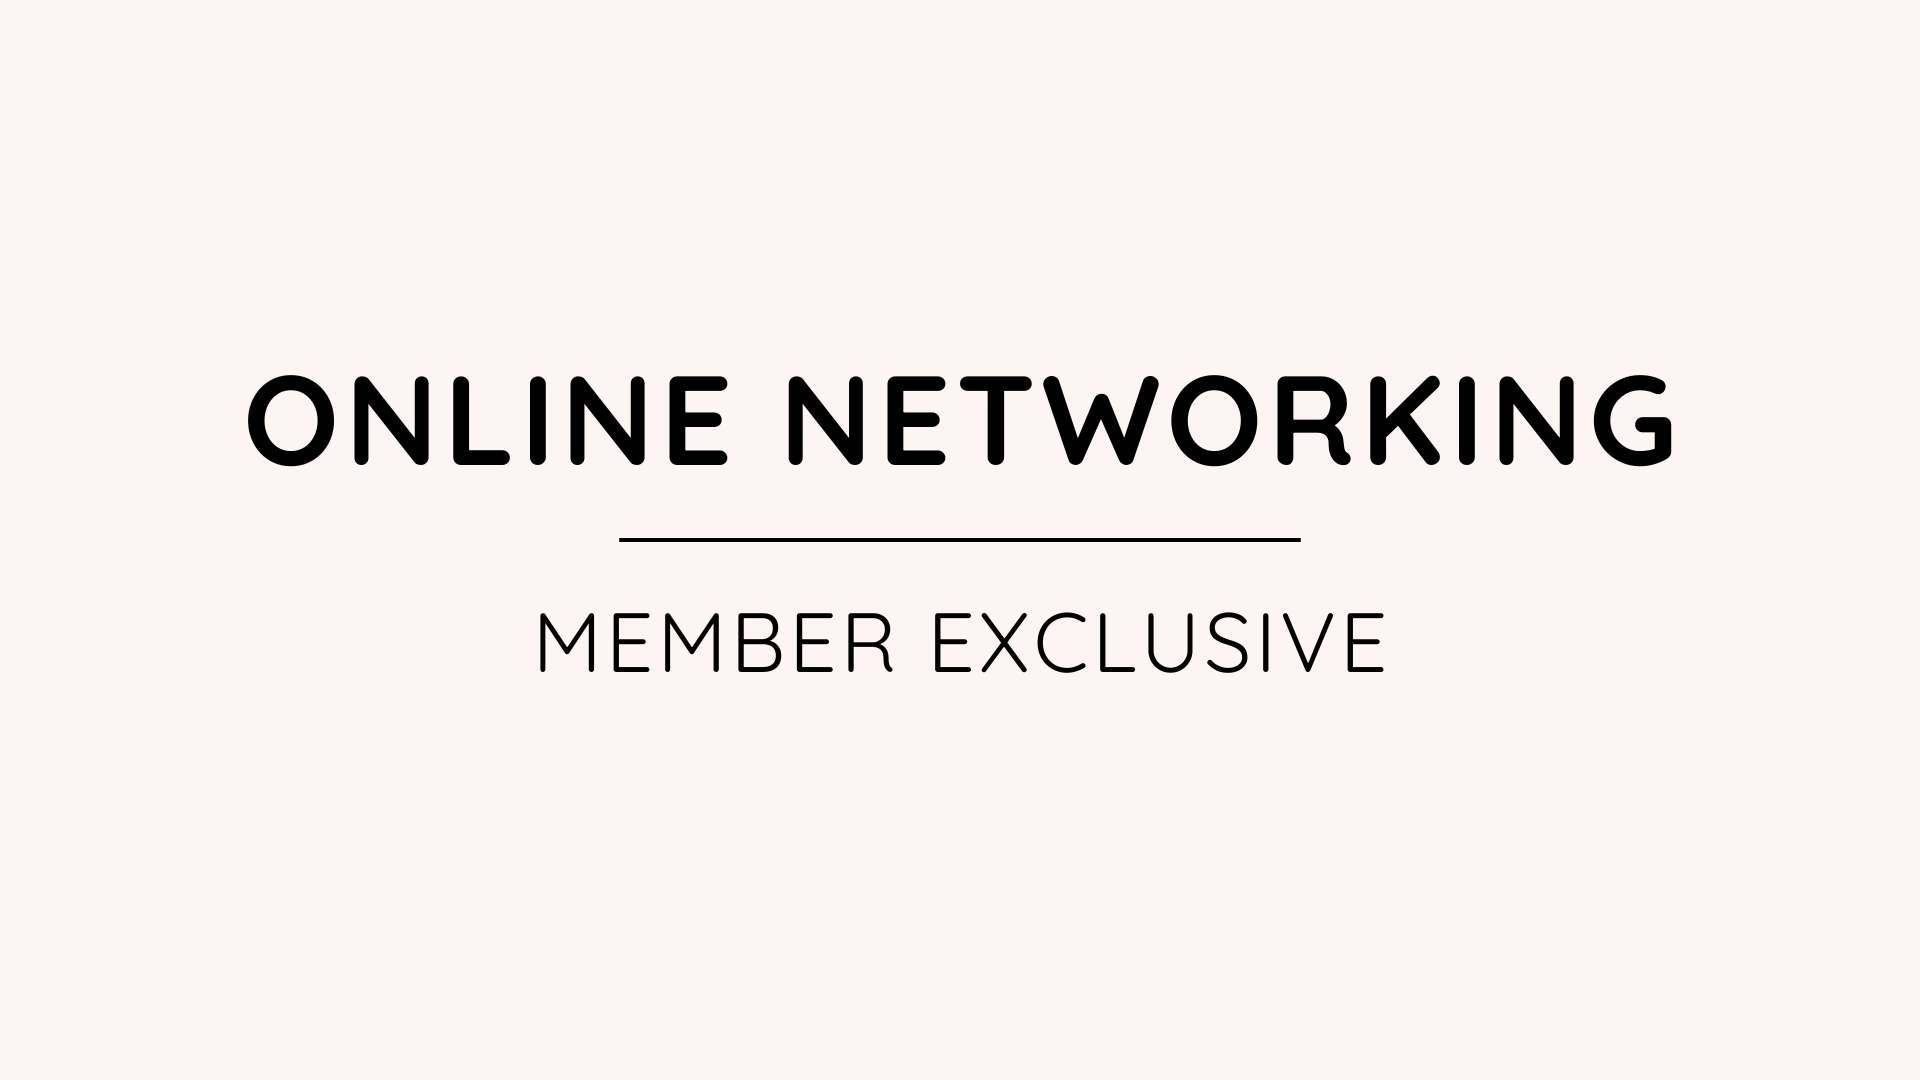 where women connect online networking member exclusive